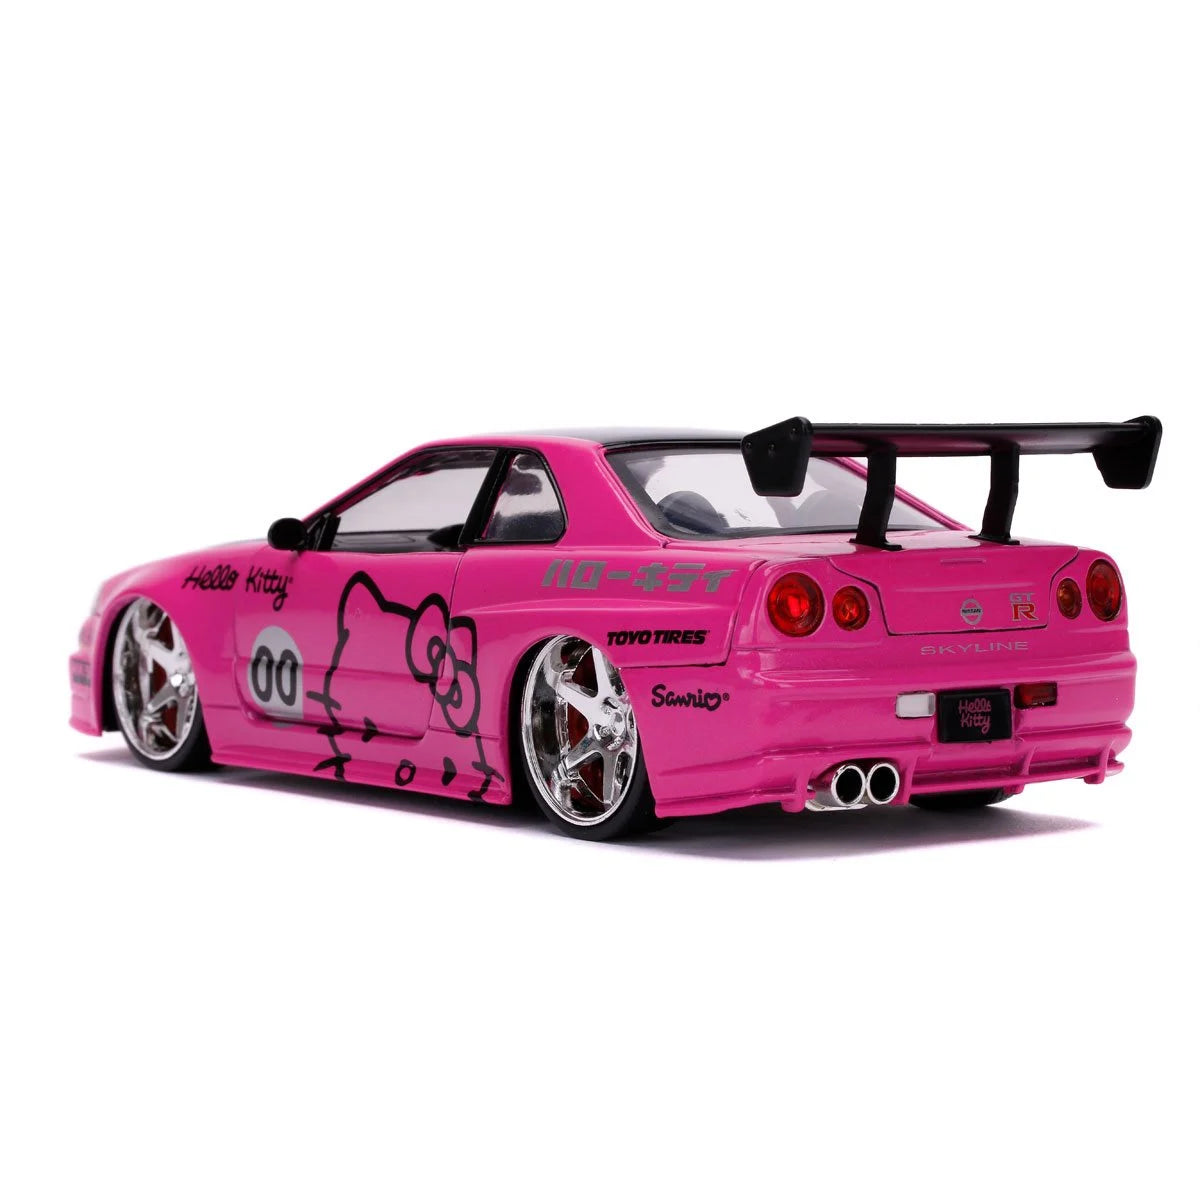 HELLO KITTY 2002 NISSAN SKYLINE GT-R R34 1:24 SCALE DIE-CAST METAL VEHICLE WITH FIGURE